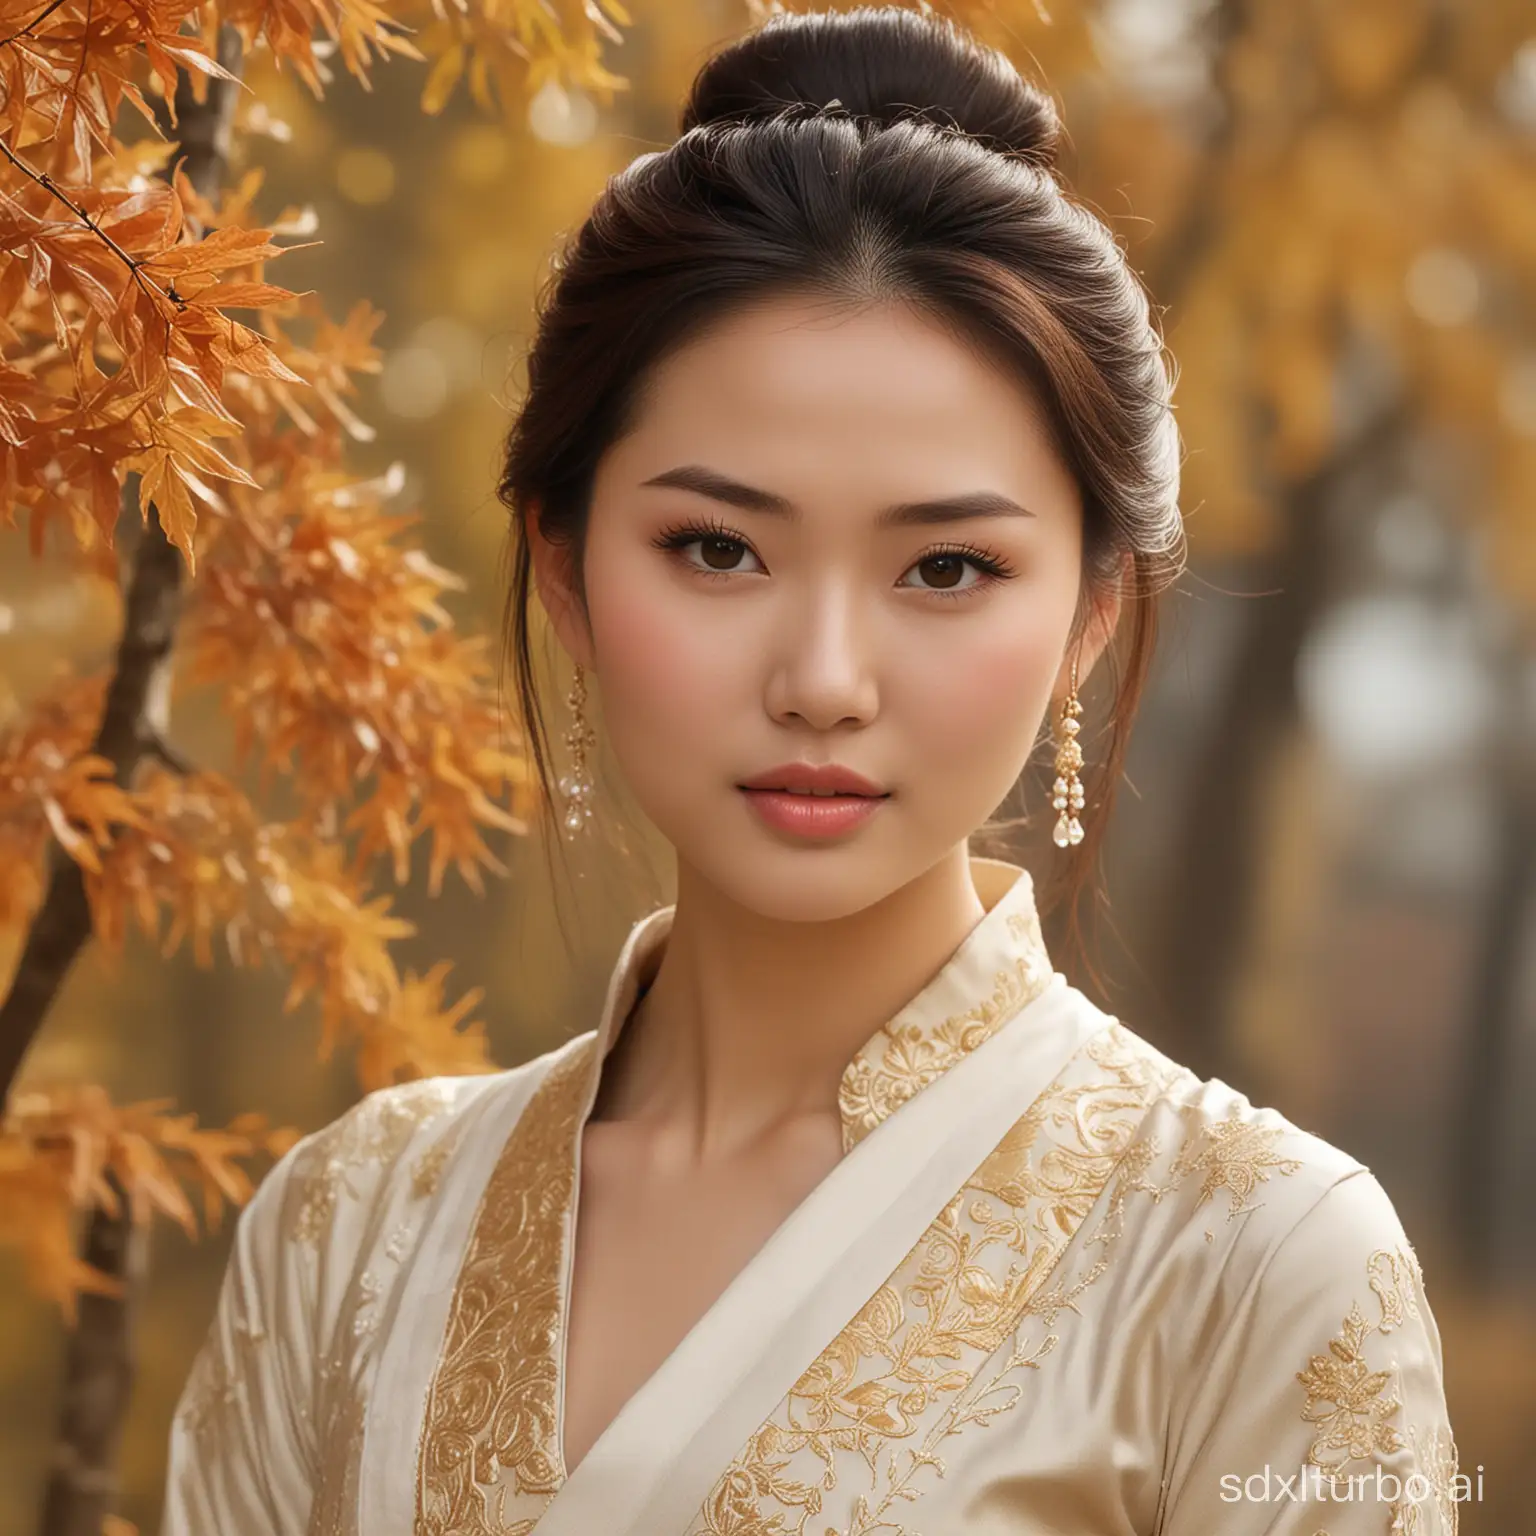 Asian women, with delicate autumn beauty, possess a harmonious blend of grace and charm. Shoulders like carved, waist as slender as a reed. Graceful neck and slender neck, fair complexion shining, with natural fragrance untouched by cosmetics. Towering cloud-like hair bun, eyebrows delicately shaped, lips rosy, teeth gleaming. Bright eyes full of charm, complemented by grace and authority, displaying exquisite beauty and elegance with tranquil demeanor. Their gentle demeanor is more charming than words. Their unique attire stands out through the ages, their figures matching the ideal.